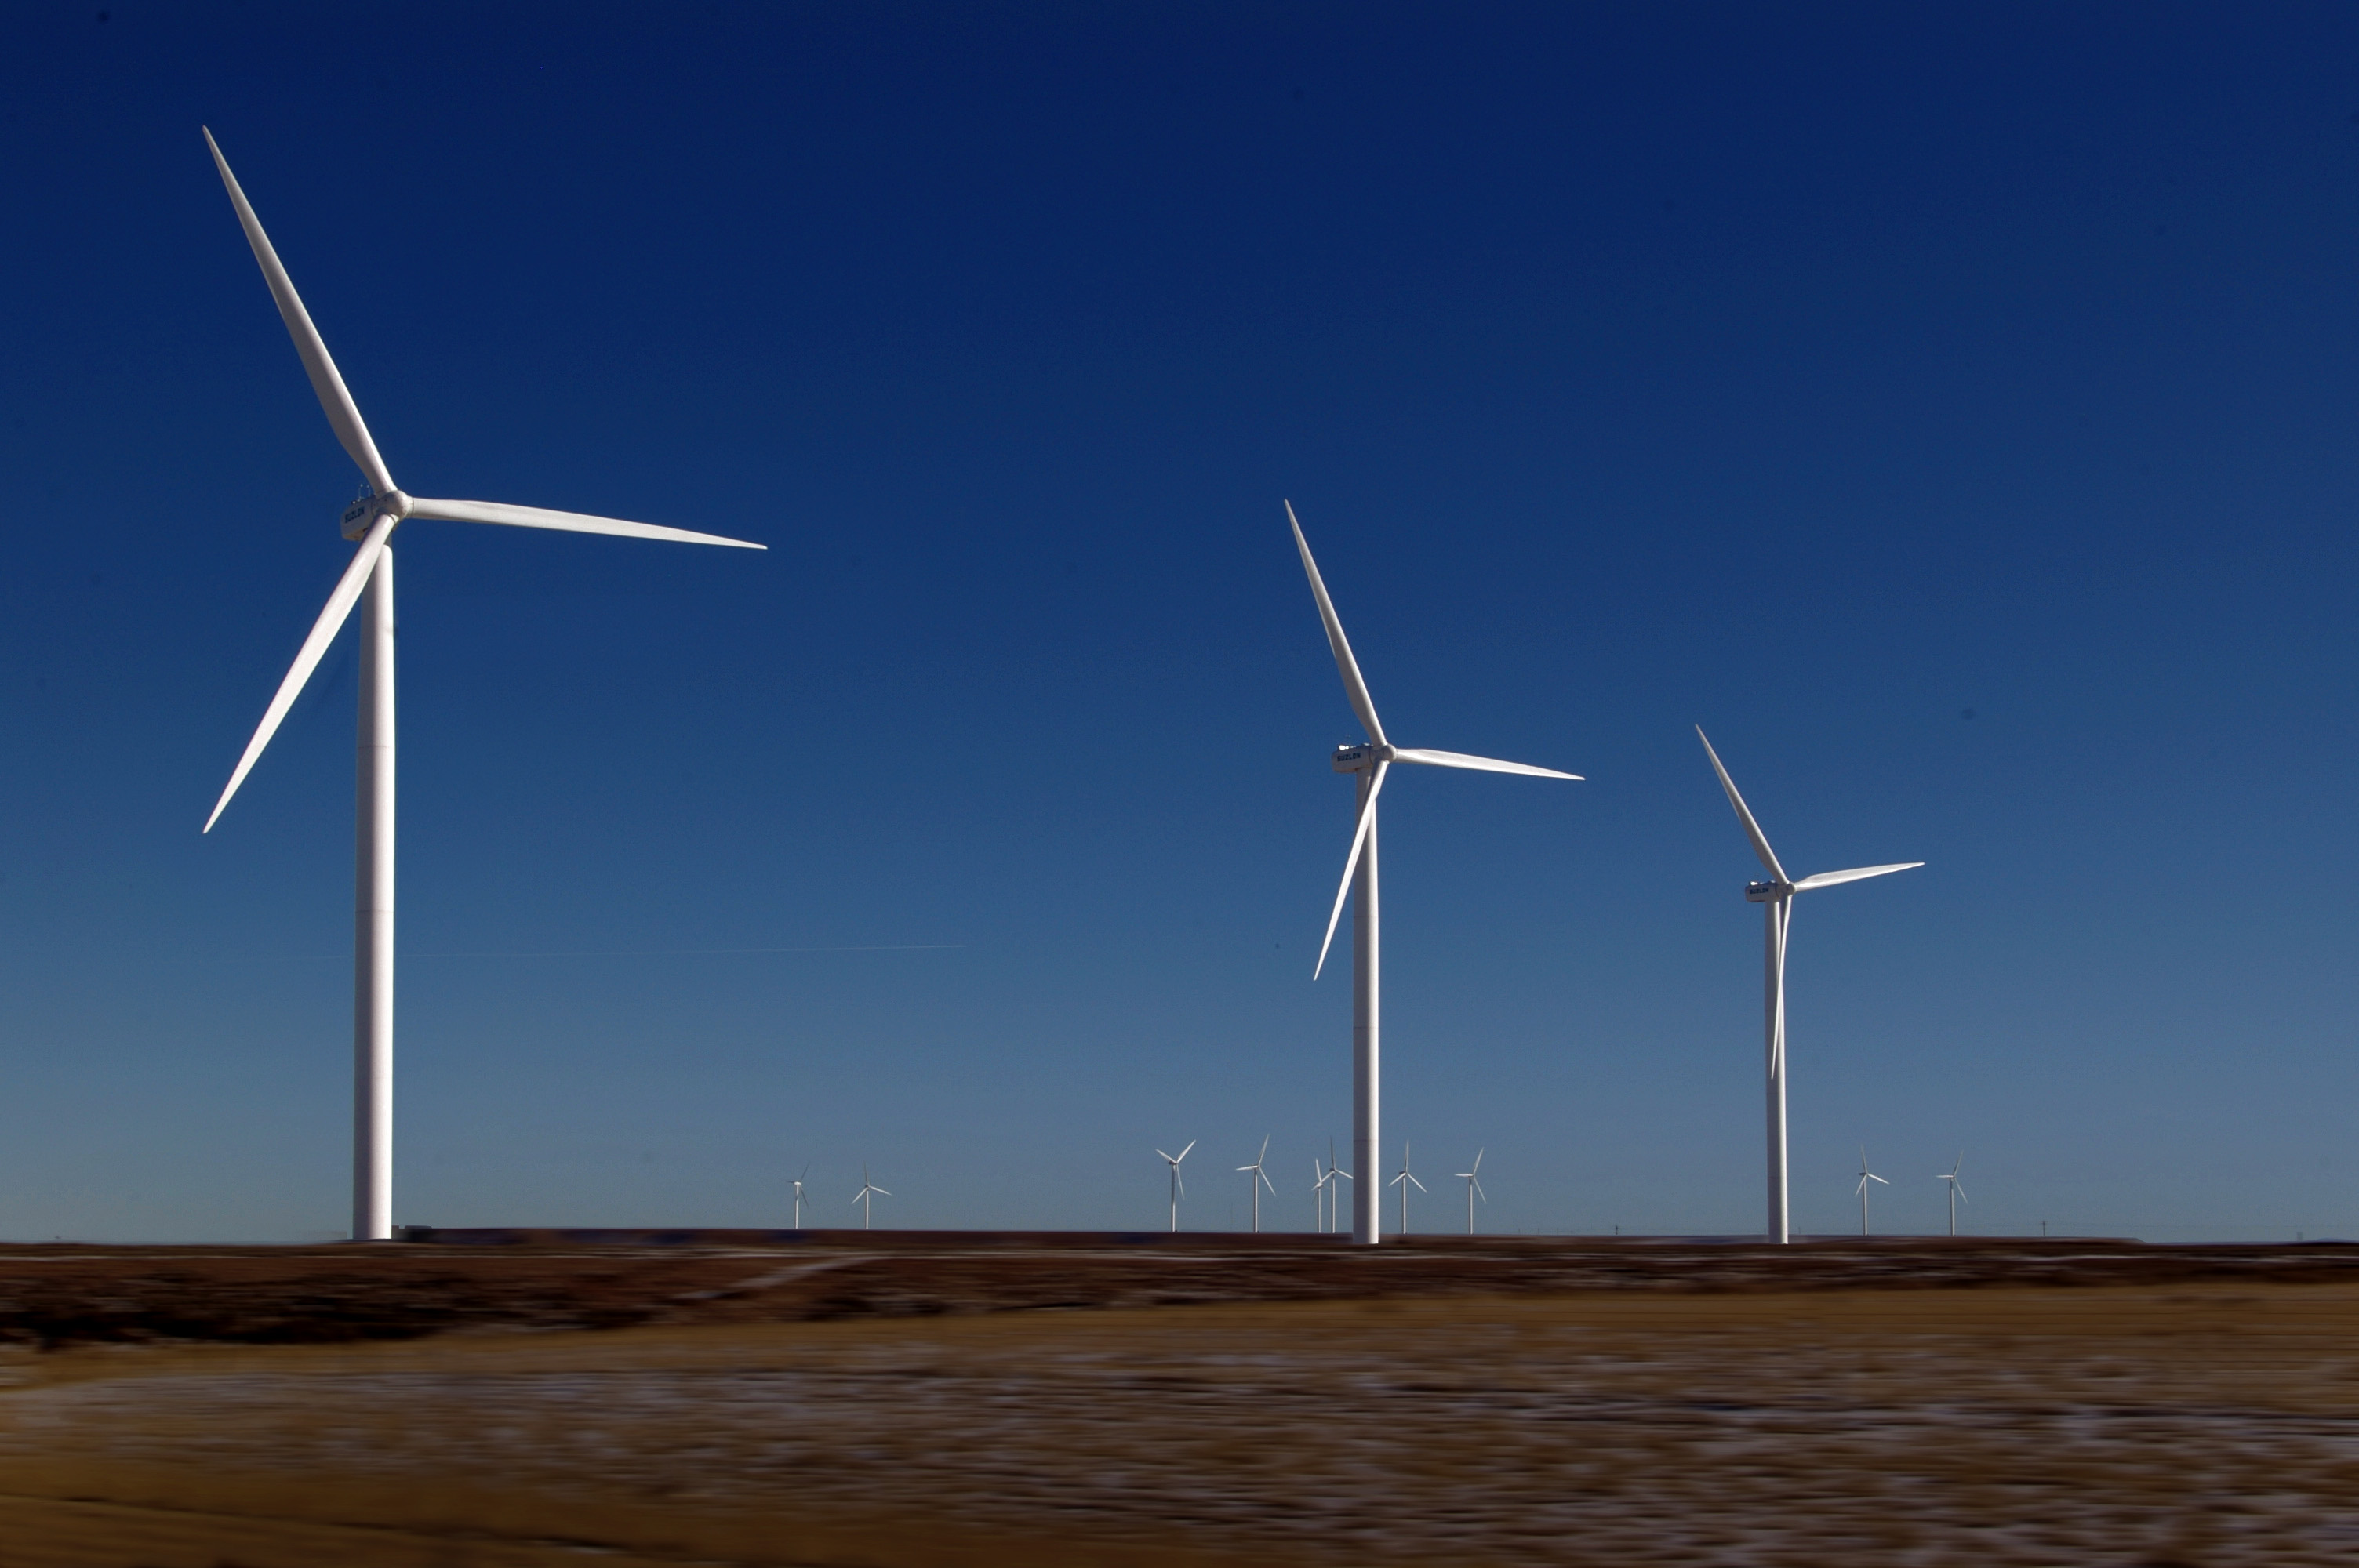 Clean Energy Demands Continue to Boost Global Wind Turbine Market